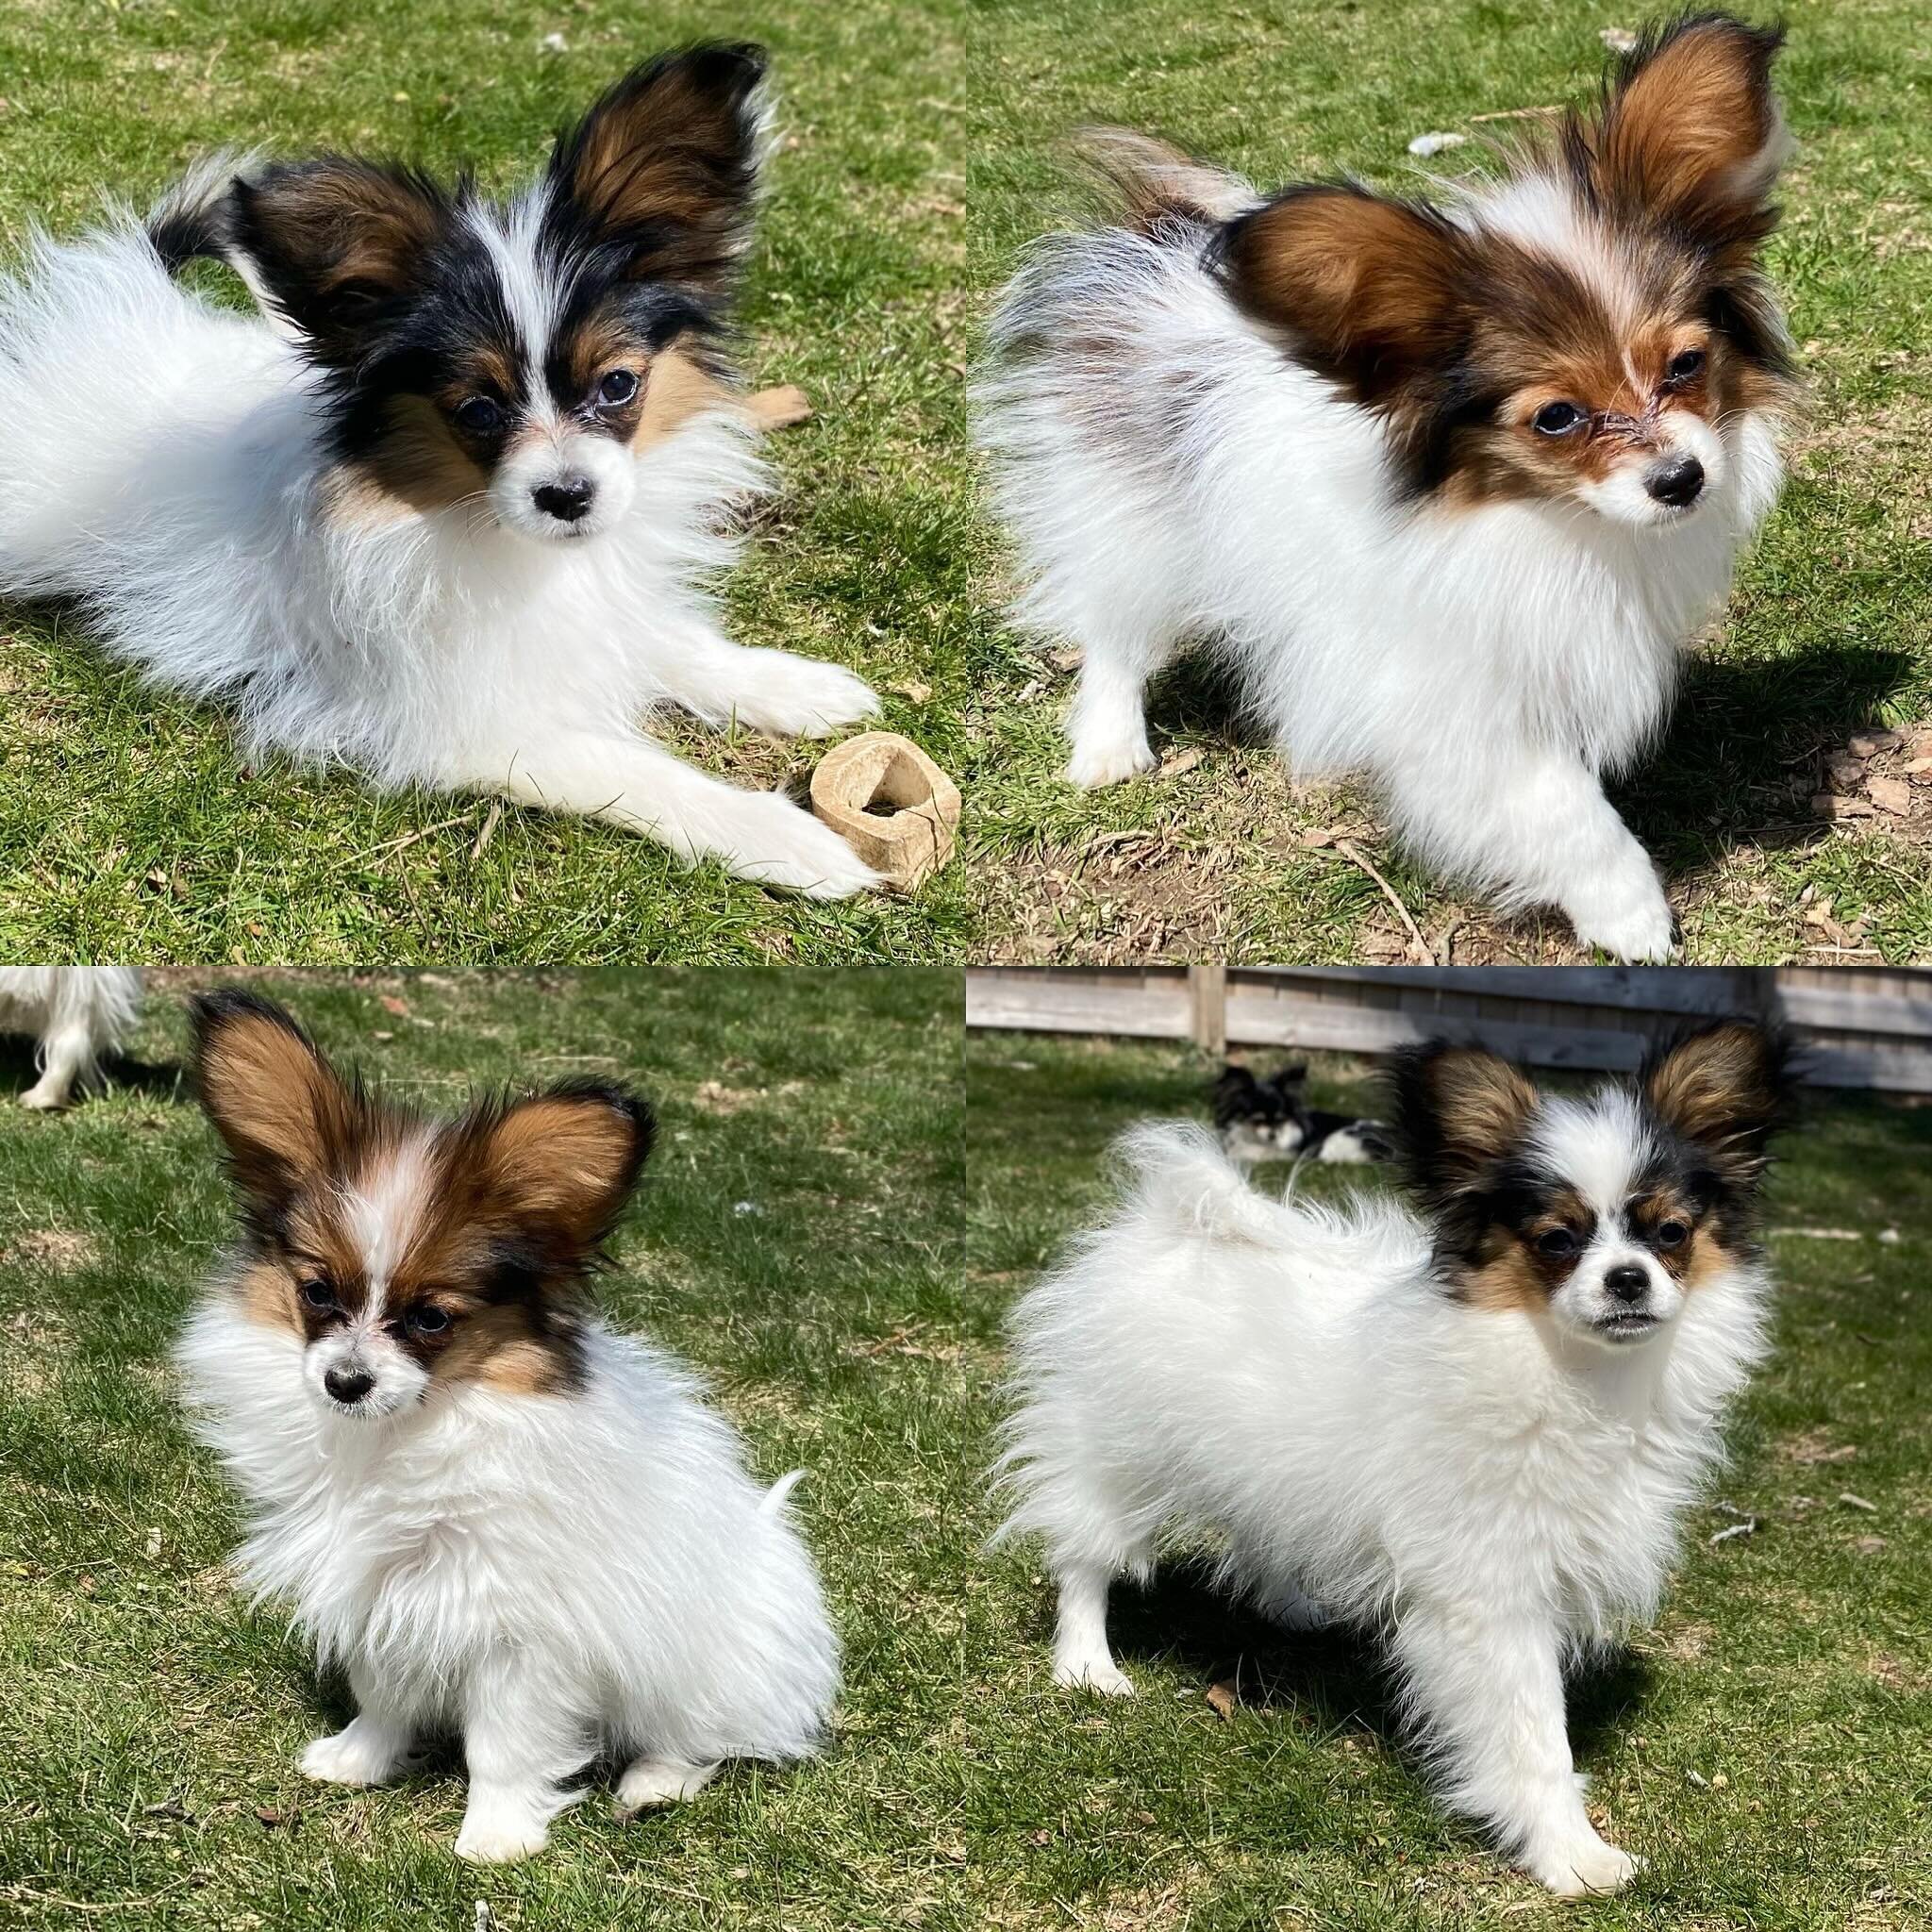 Our four puppy girls enjoying the slightly warmer weather yesterday #papillon #papillons #papillonsofinstagram #papillonlove #papillonpuppiesofinstagram #papillonpuppies #puppylove #pupper #puppiesofinstagram #puppylife #sablewings